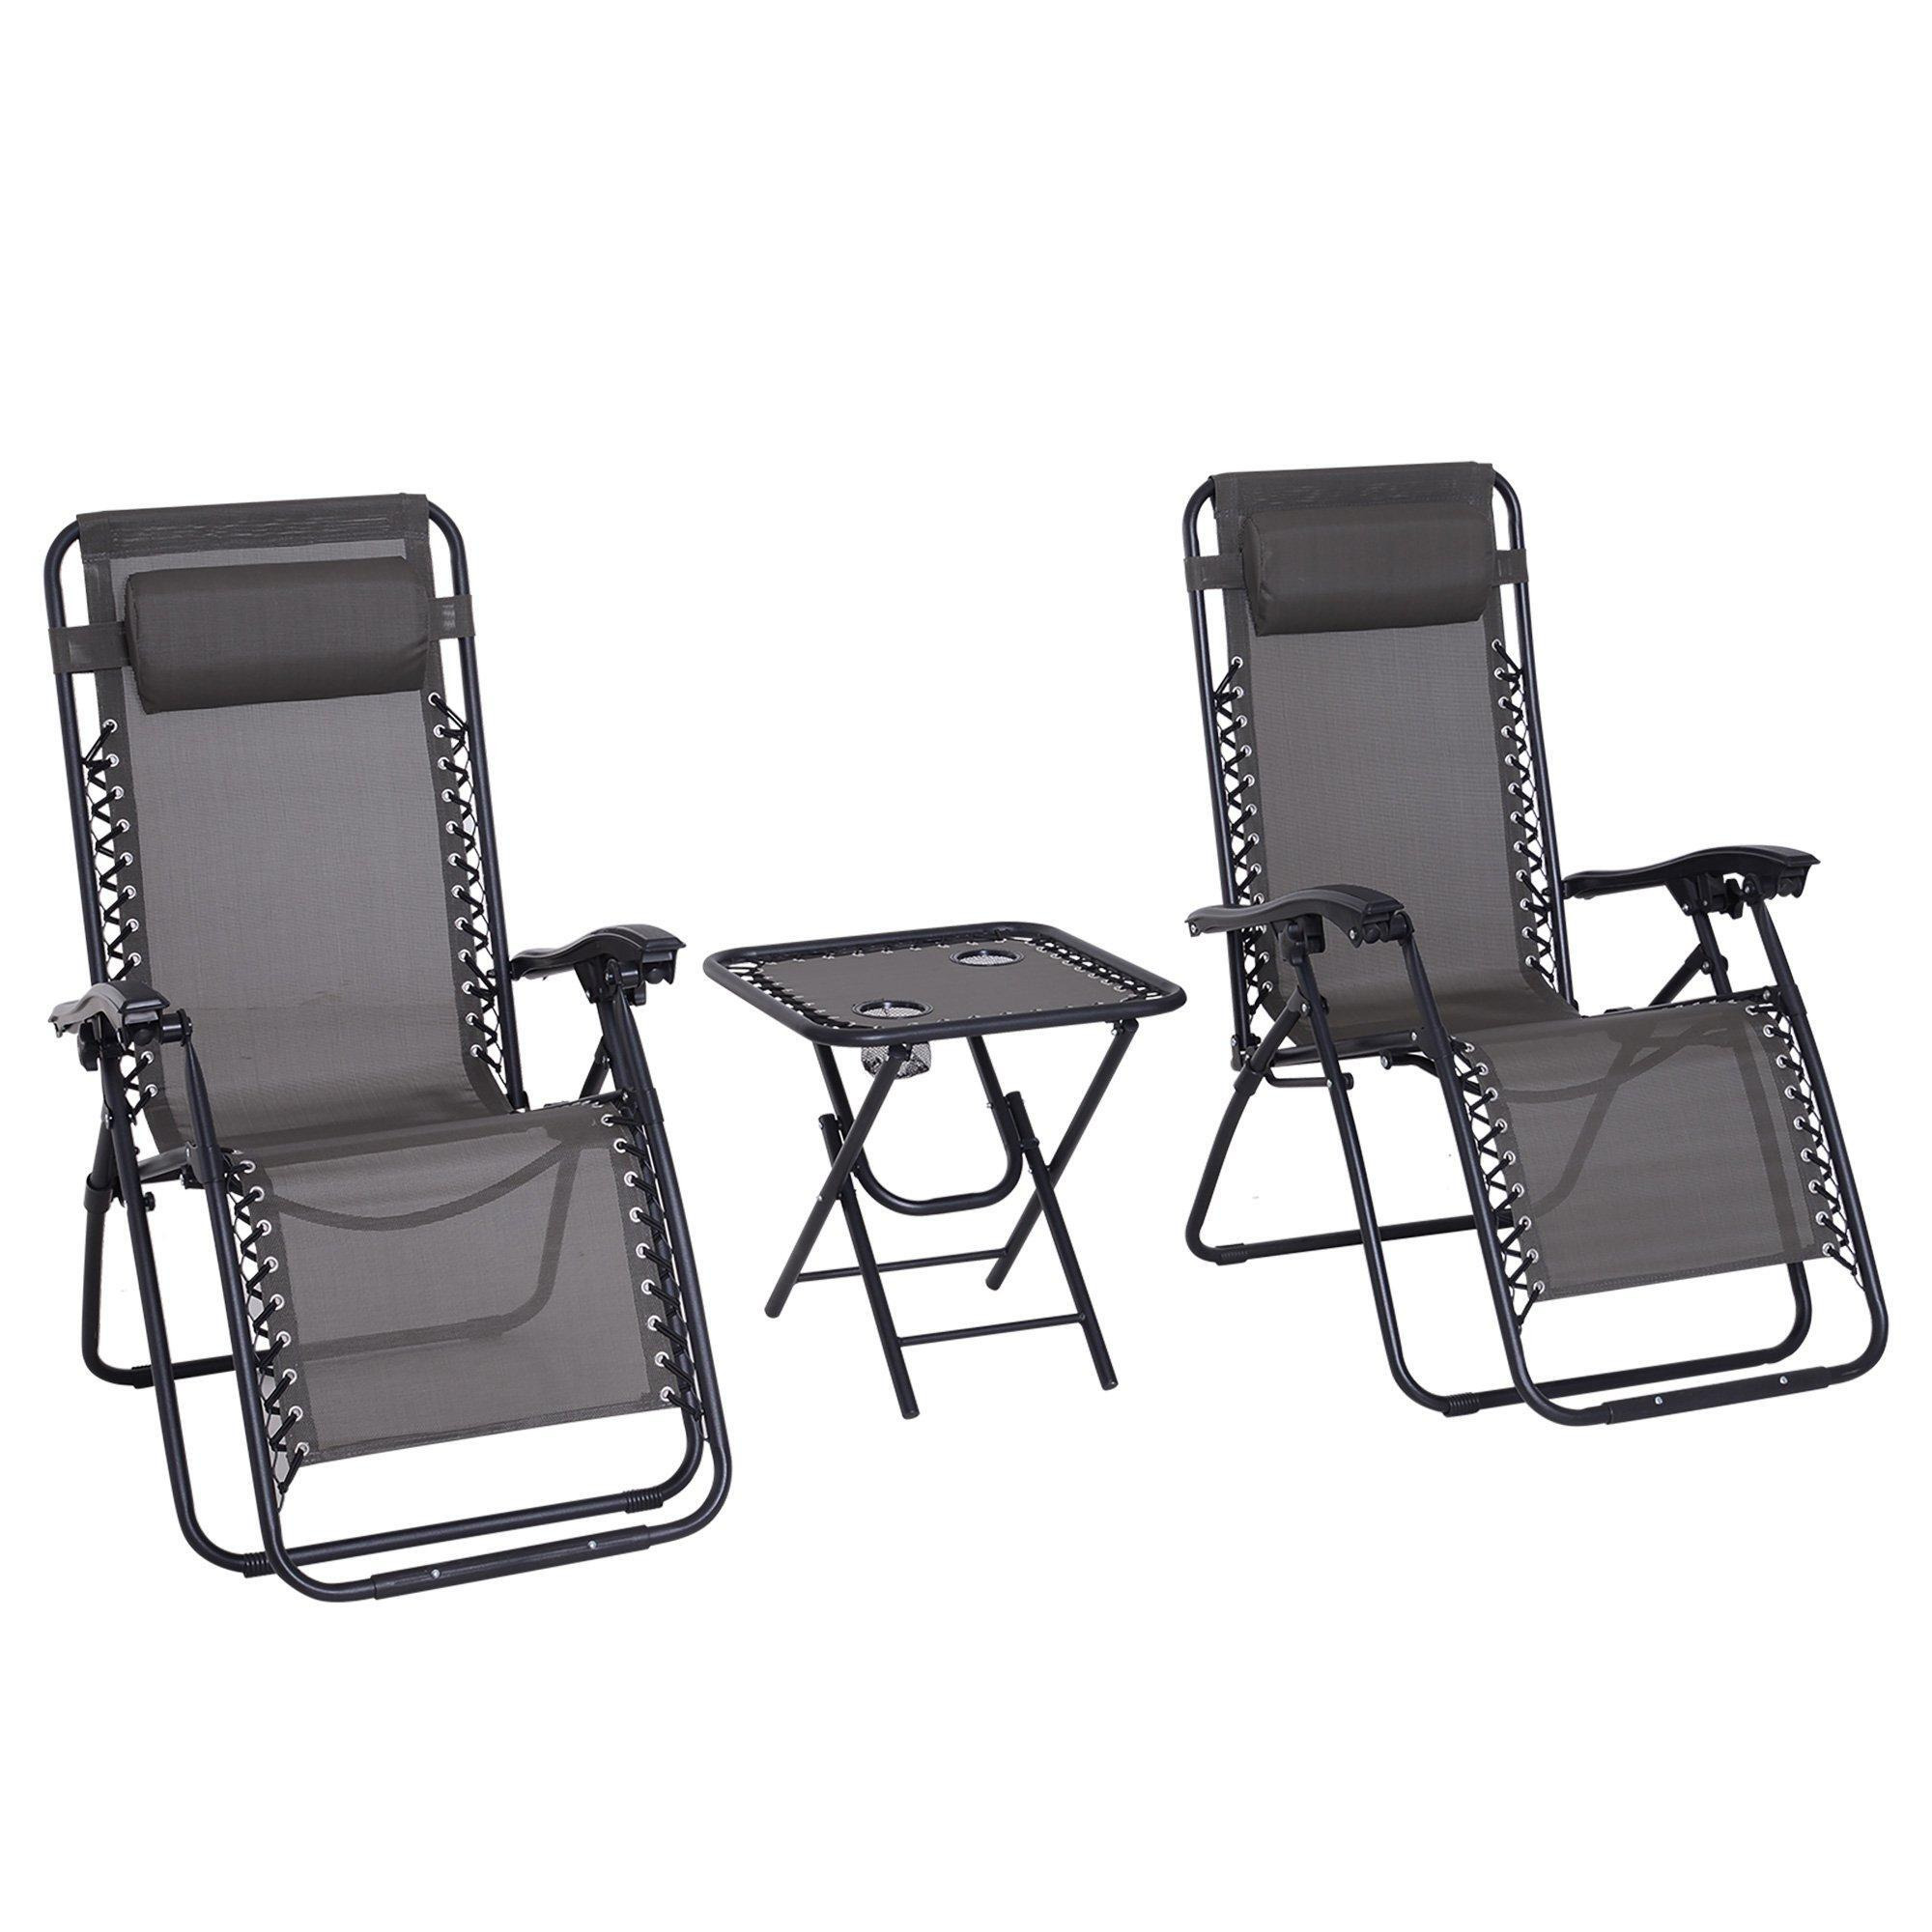 3PC Zero Gravity Chairs Sun Lounger Table Setwith Cup Holders - image 1